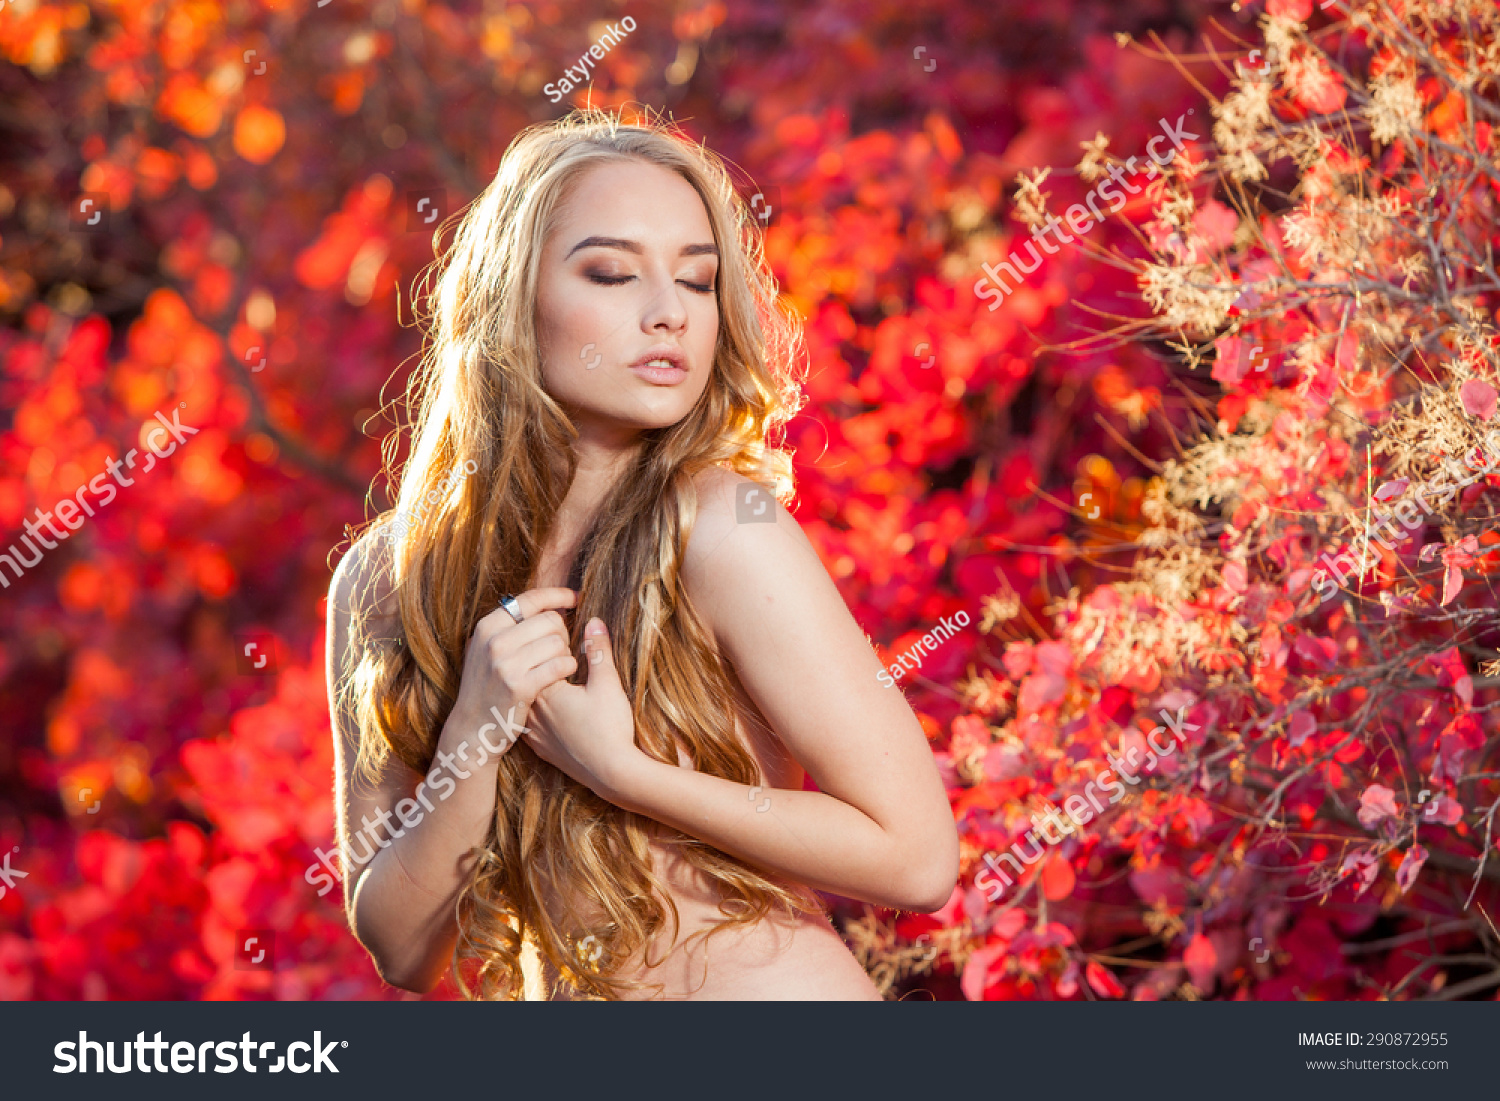 stock-photo-young-woman-on-a-background-of-red-and-yellow-autumn-leaves-with-beautiful-curly-hair-on-his-chest-